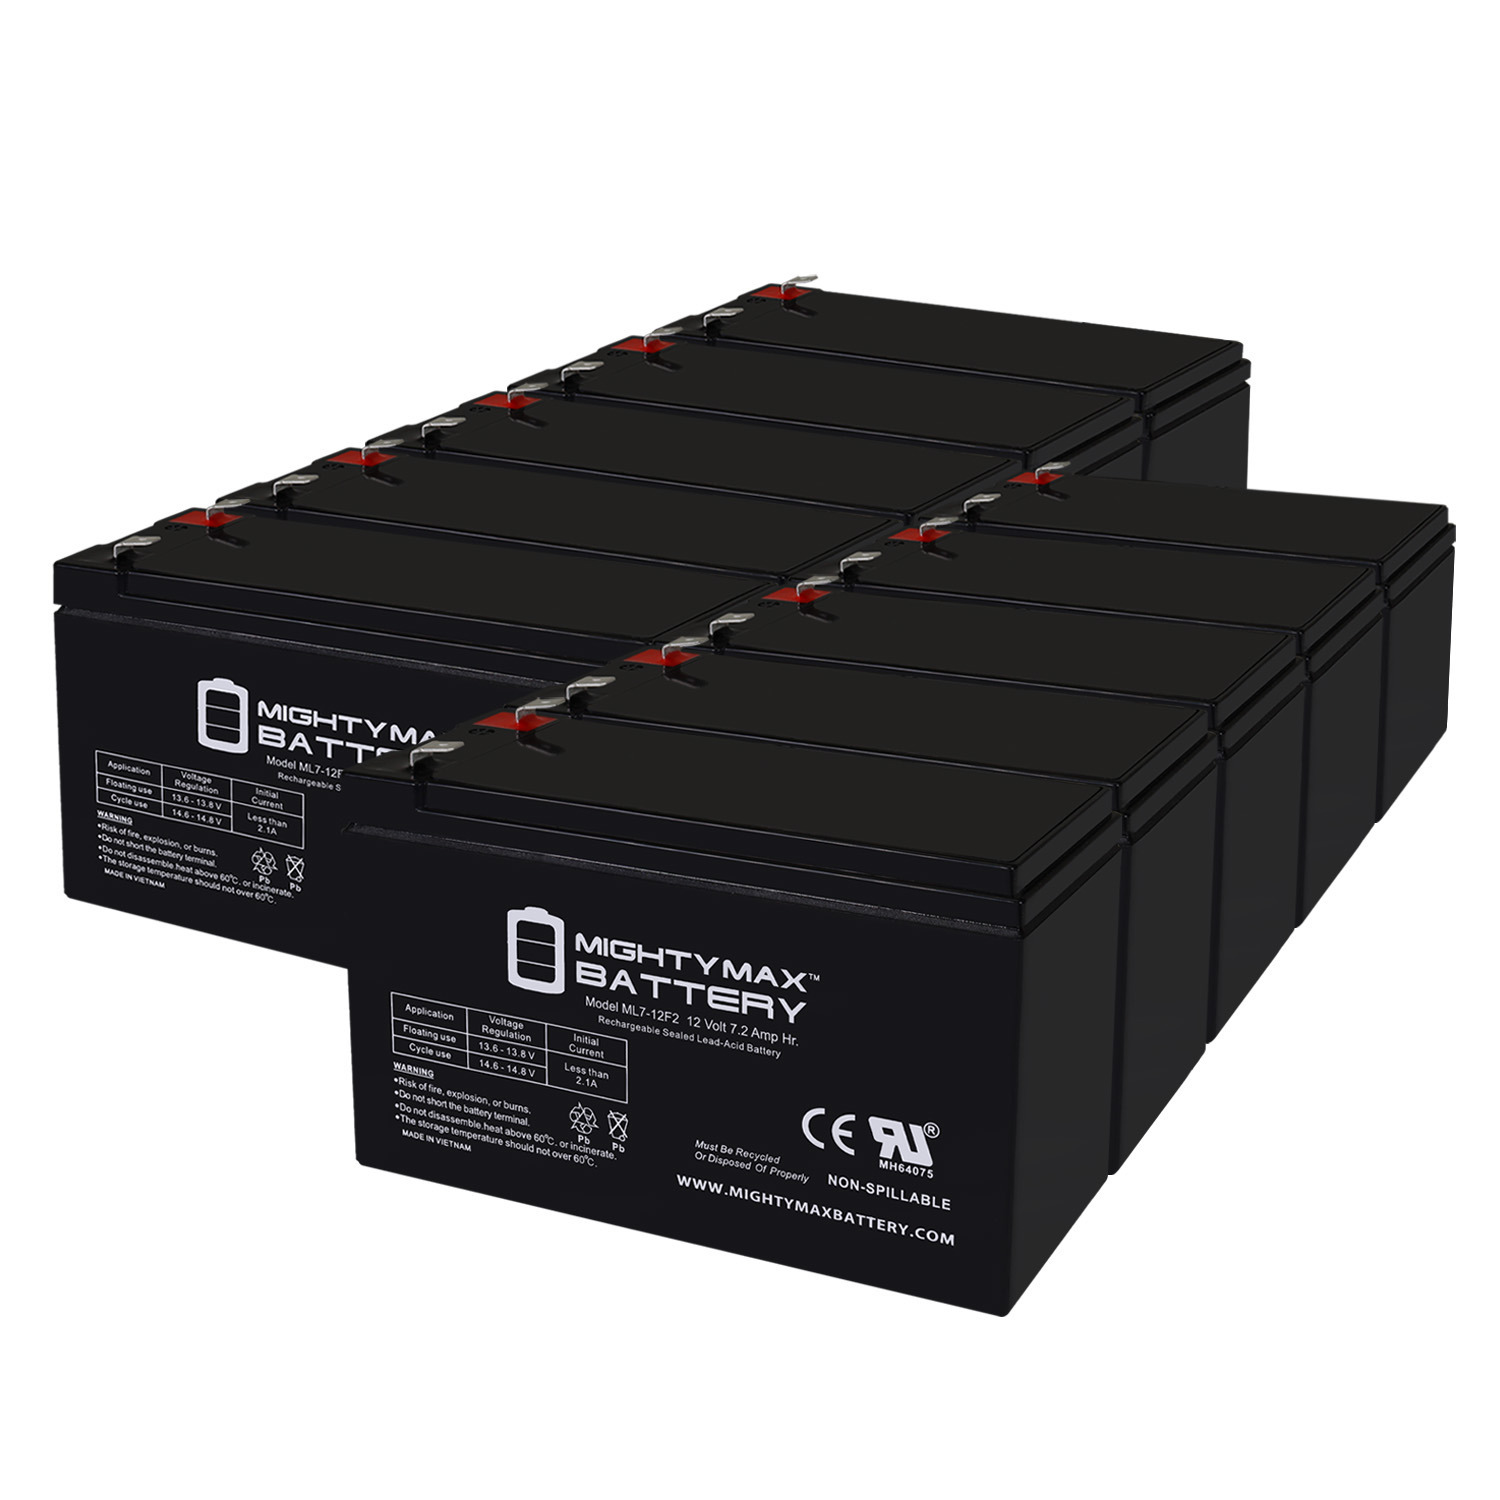 12V 7Ah F2 Replacement Battery for Eaton Powerware PW3115-300i - 10 Pack